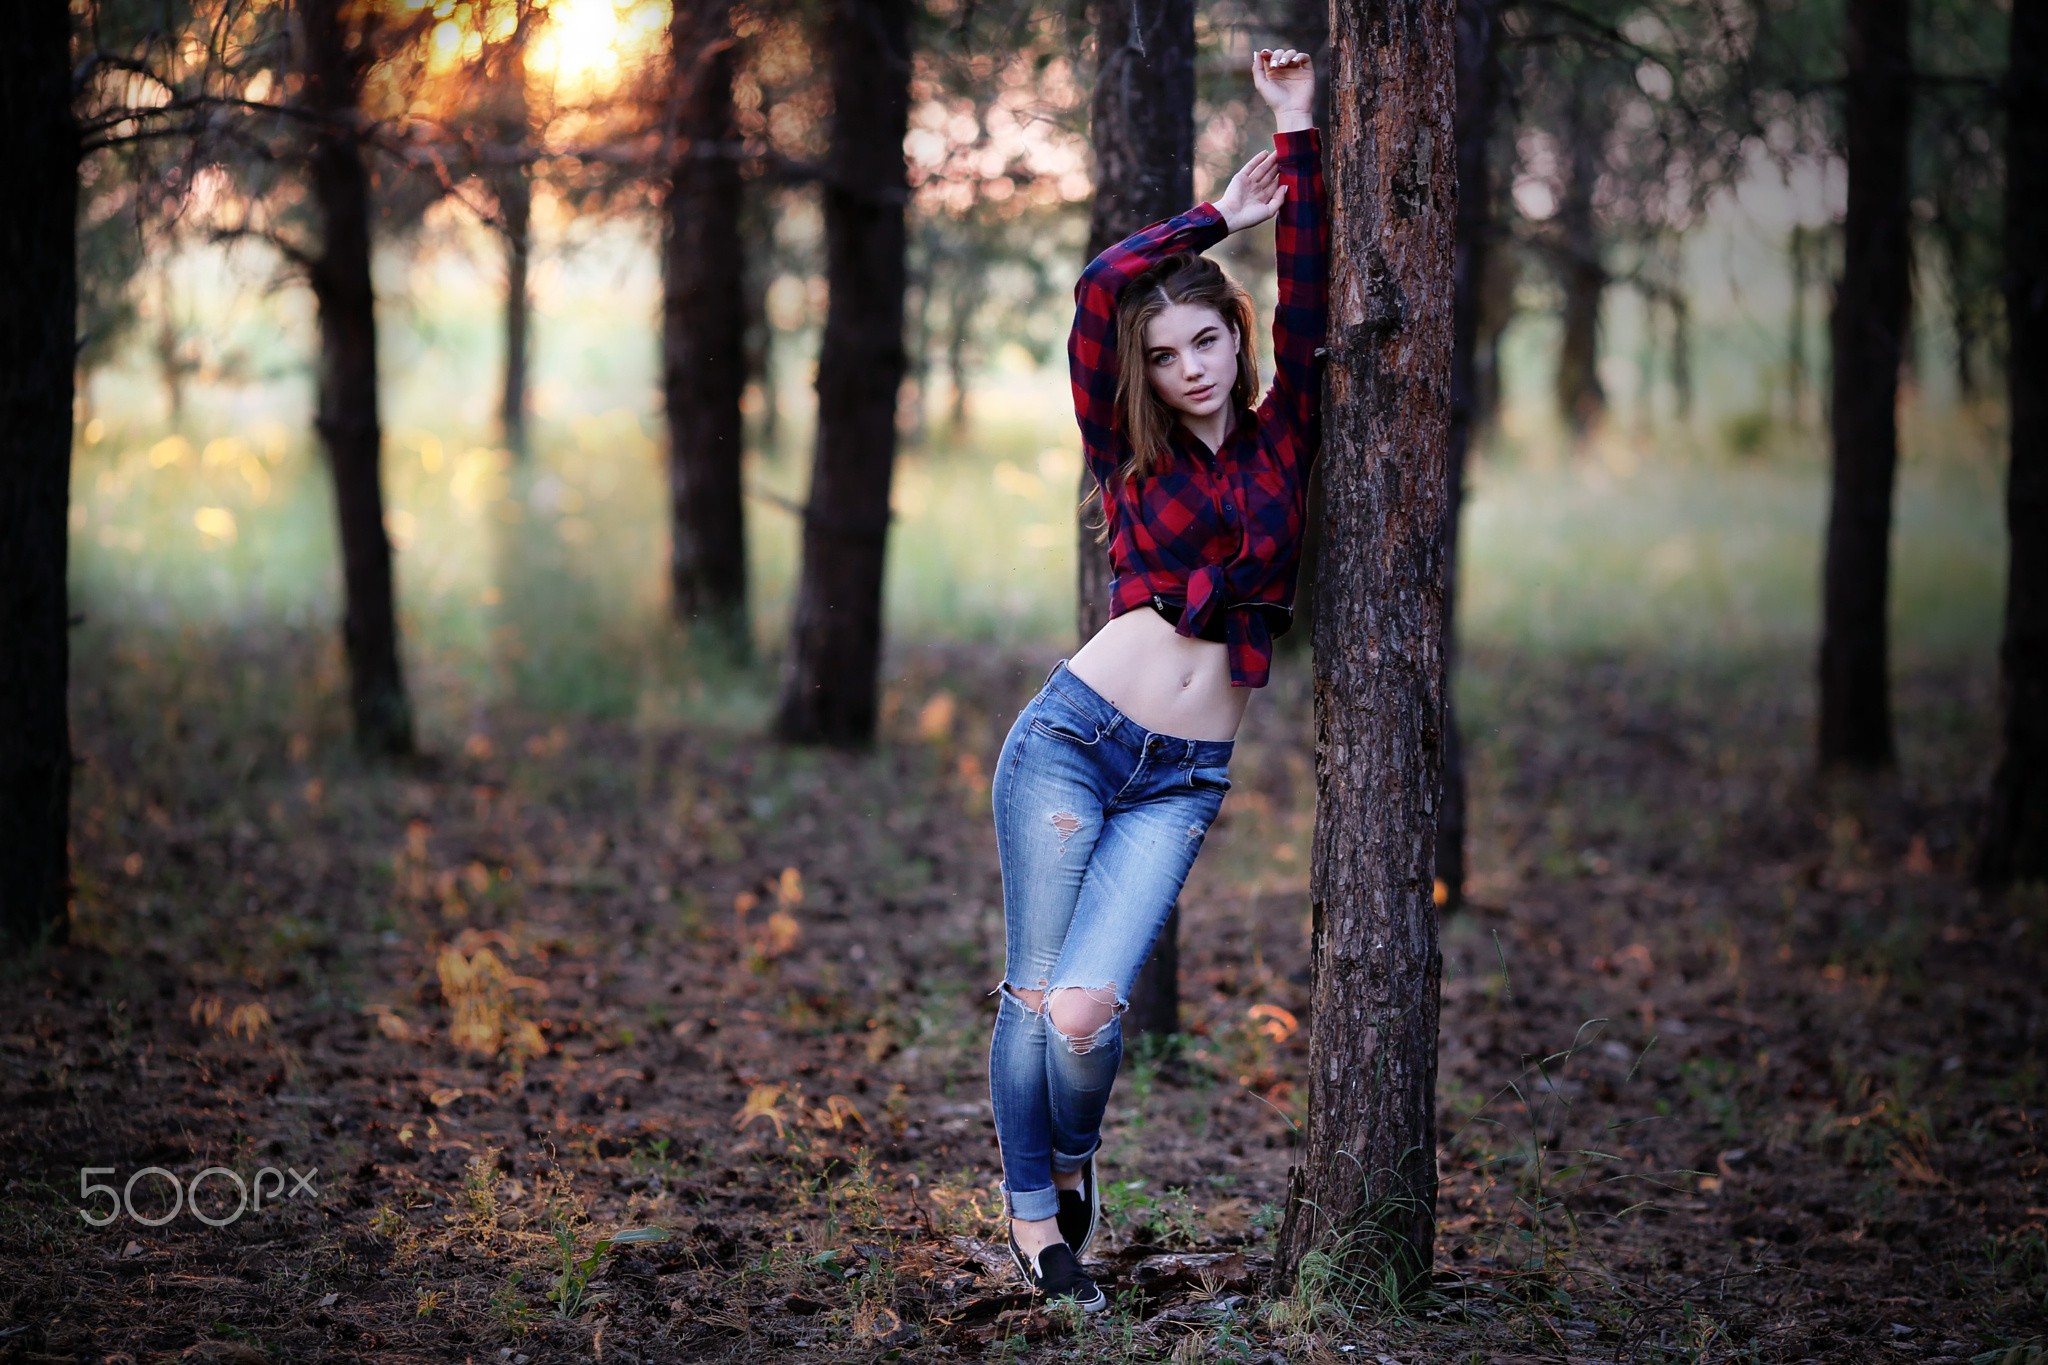 People 2048x1365 women pants jeans shirt torn jeans sneakers women outdoors forest arms up pale leaves 500px plaid shirt Murat Kuzhakhmetov Margarita Murat belly leaning trees blue  jeans slim body model